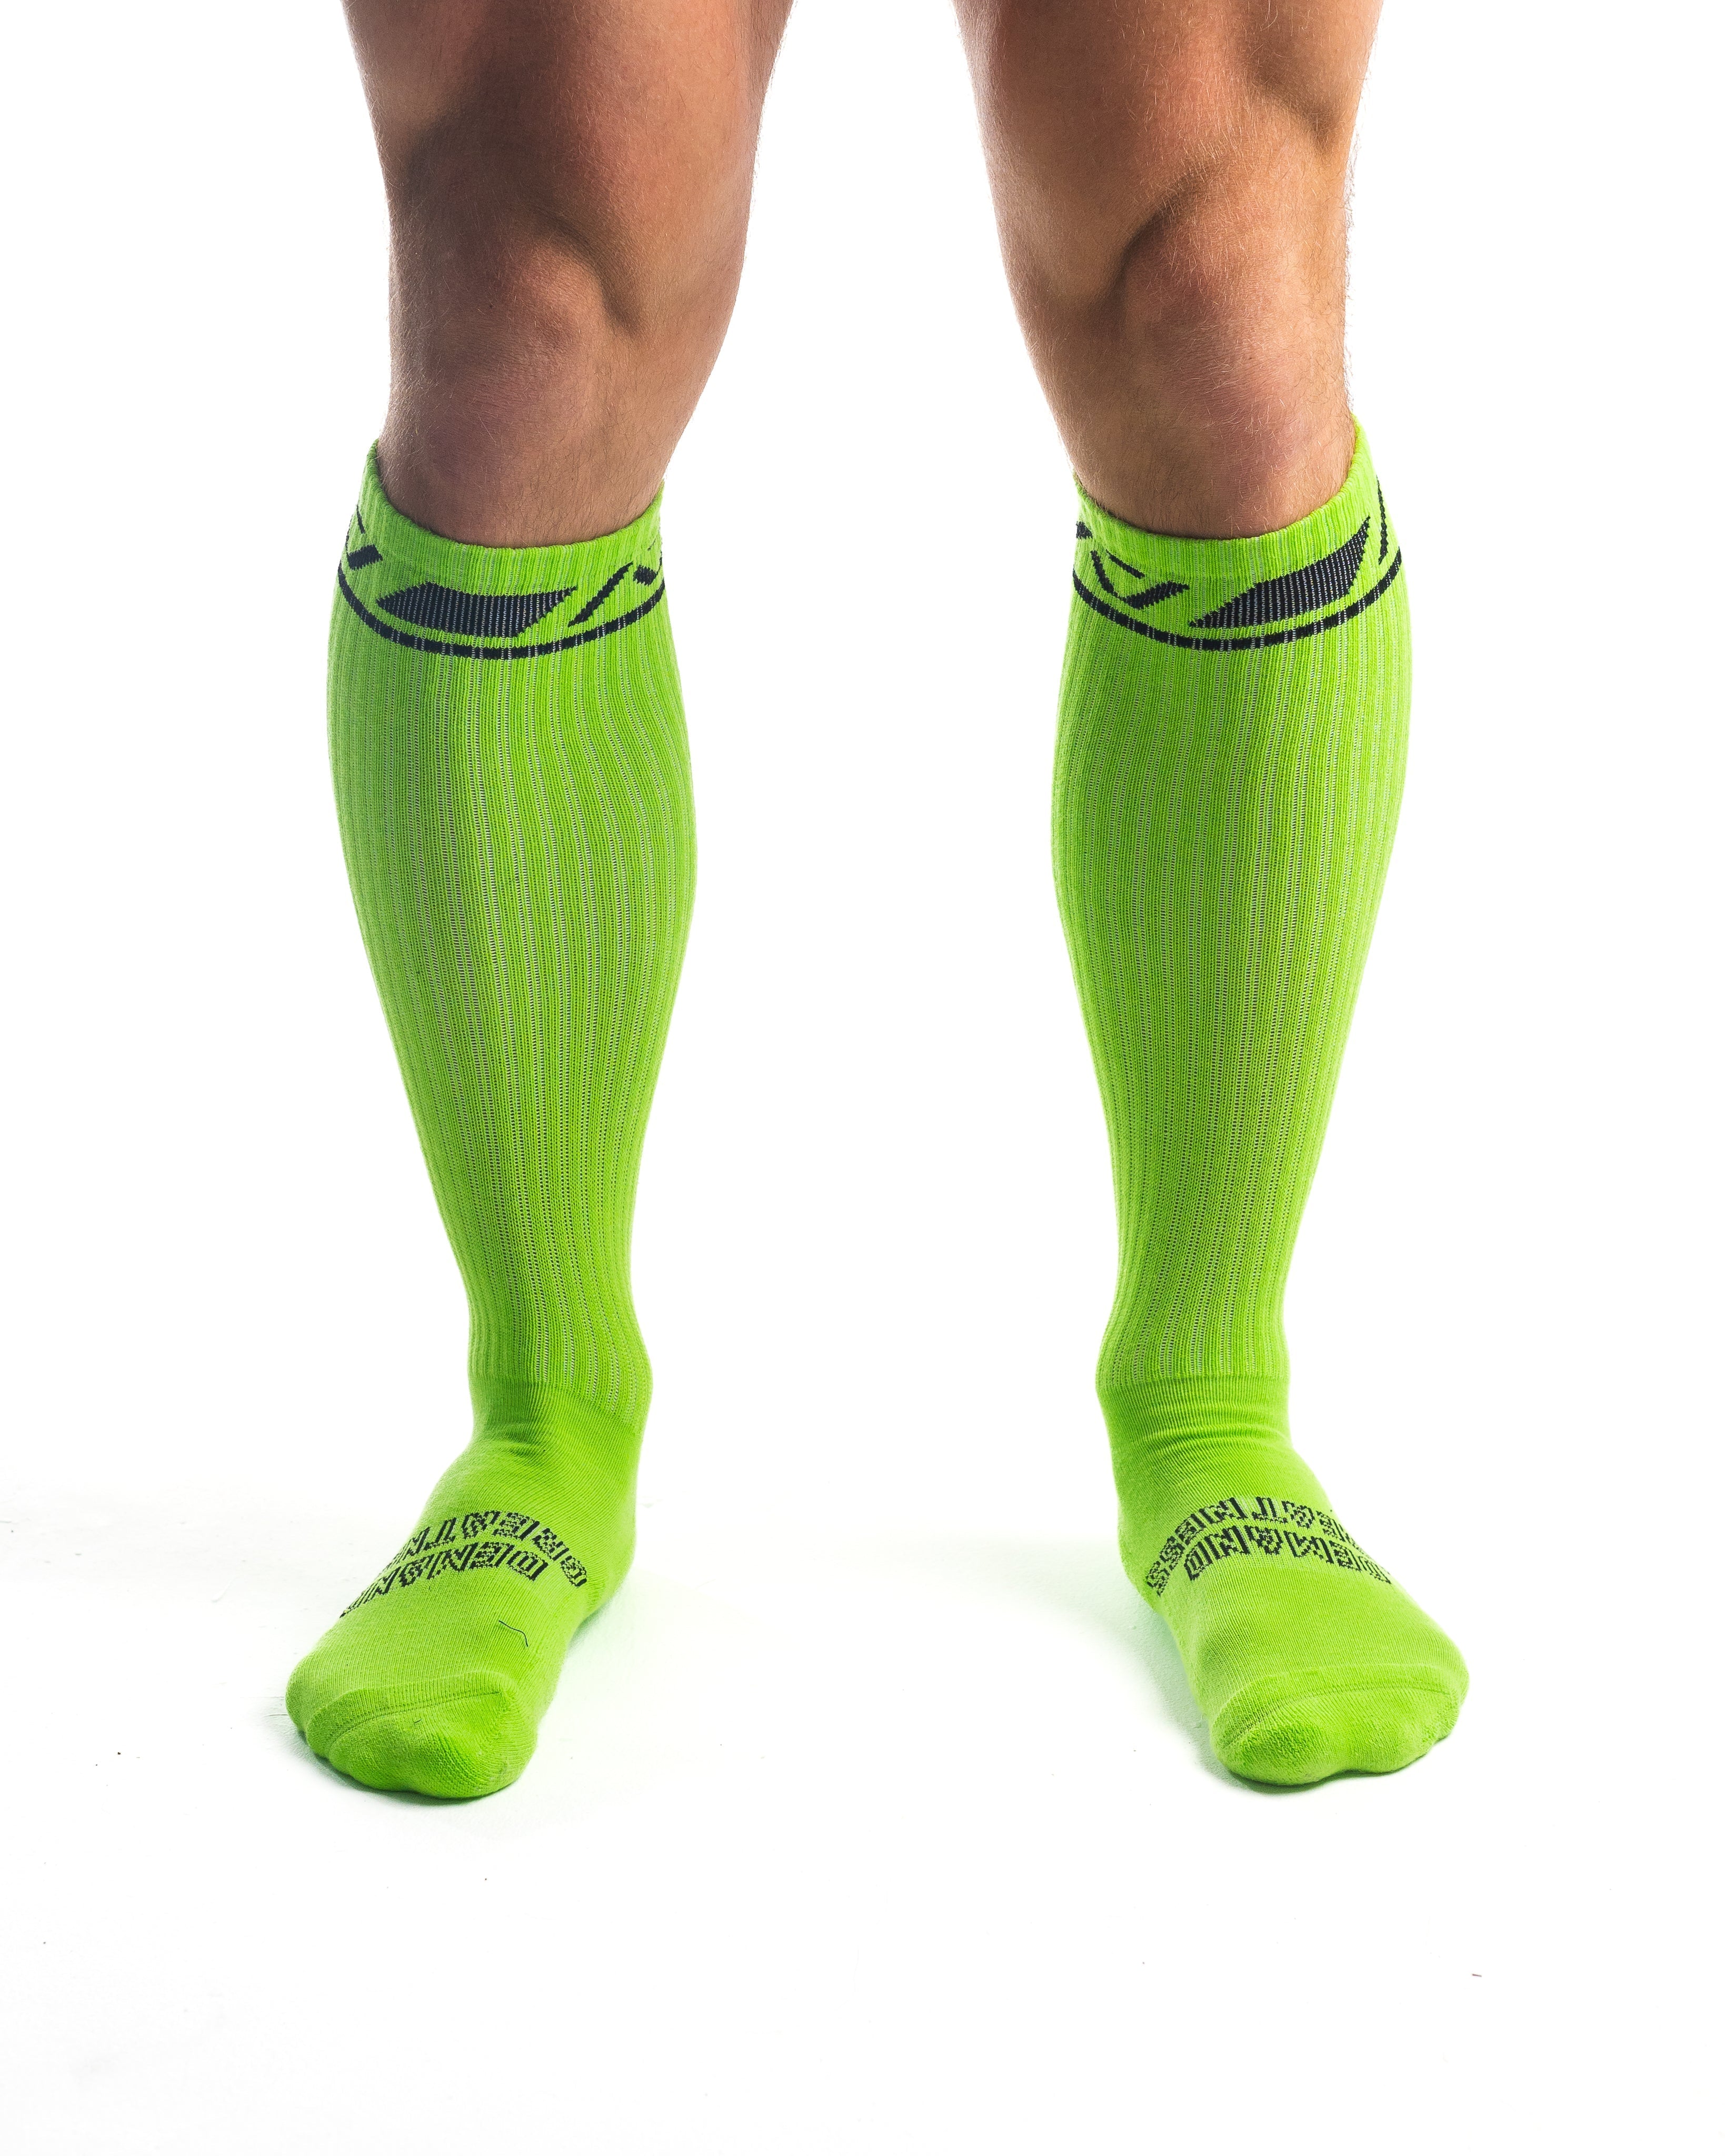 A7 Alien Deadlift socks are designed specifically for pulls and keep your shins protected from scrapes. A7 deadlift socks are a perfect pair to wear in training or powerlifting competition. The IPF Approved Kit includes Powerlifting Singlet, A7 Meet Shirt, A7 Zebra Wrist Wraps, A7 Deadlift Socks, Hourglass Knee Sleeves (Stiff Knee Sleeves and Rigor Mortis Knee Sleeves). Genouillères powerlifting shipping to France, Spain, Ireland, Germany, Italy, Sweden and EU.